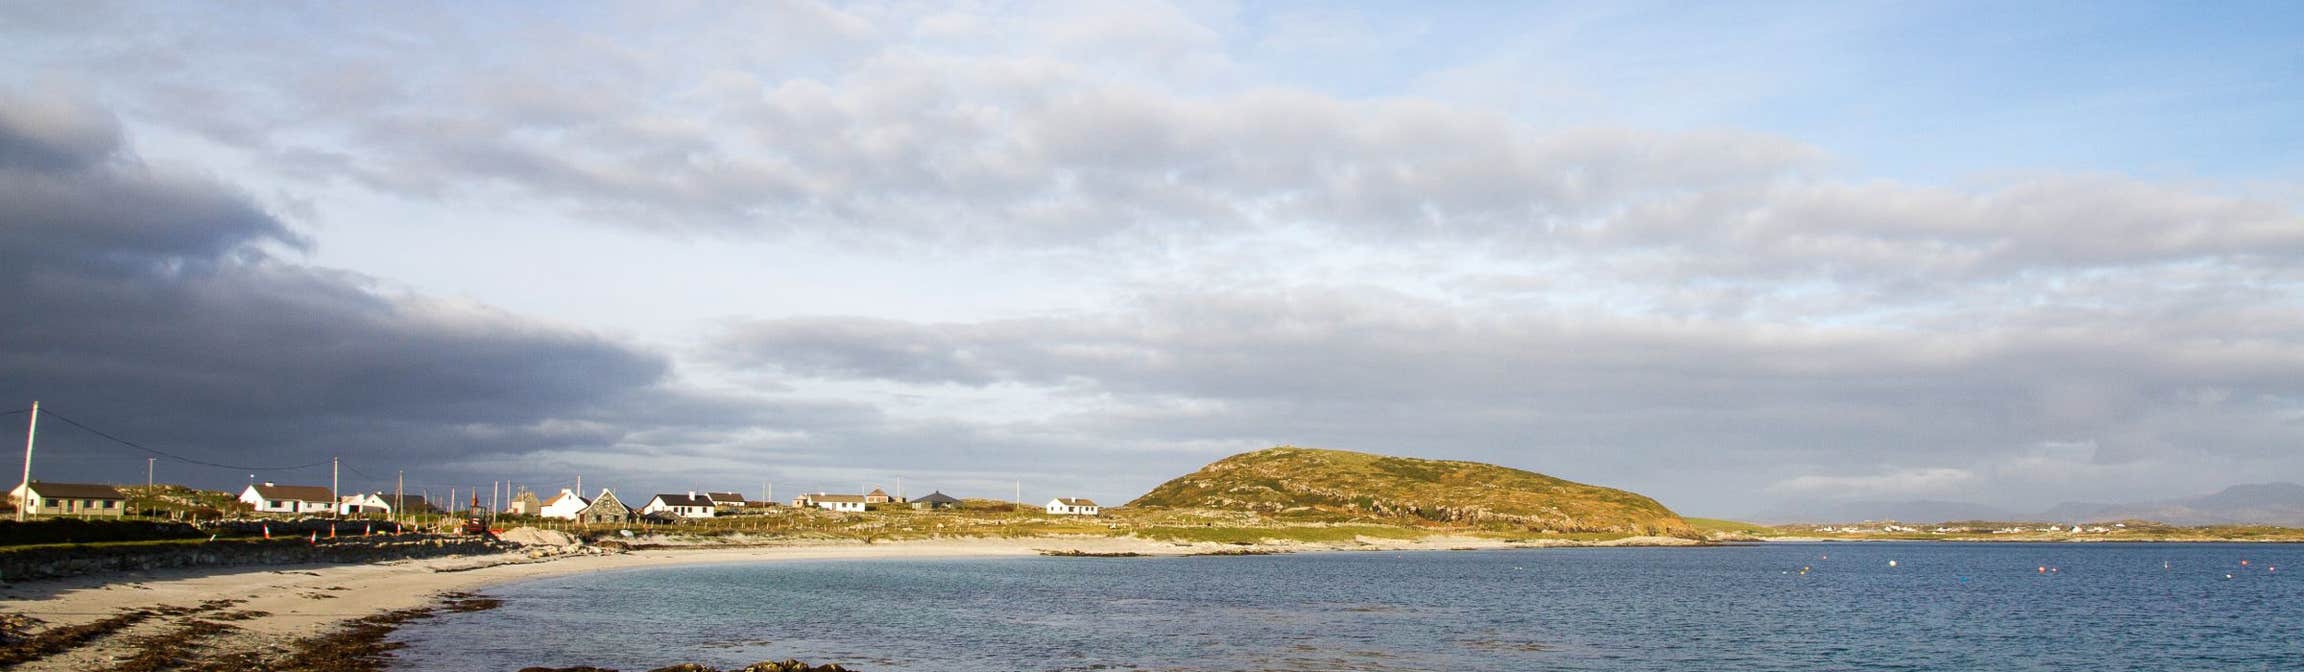 Image of Aillebrack Beach in Ballyconneely in County Galway